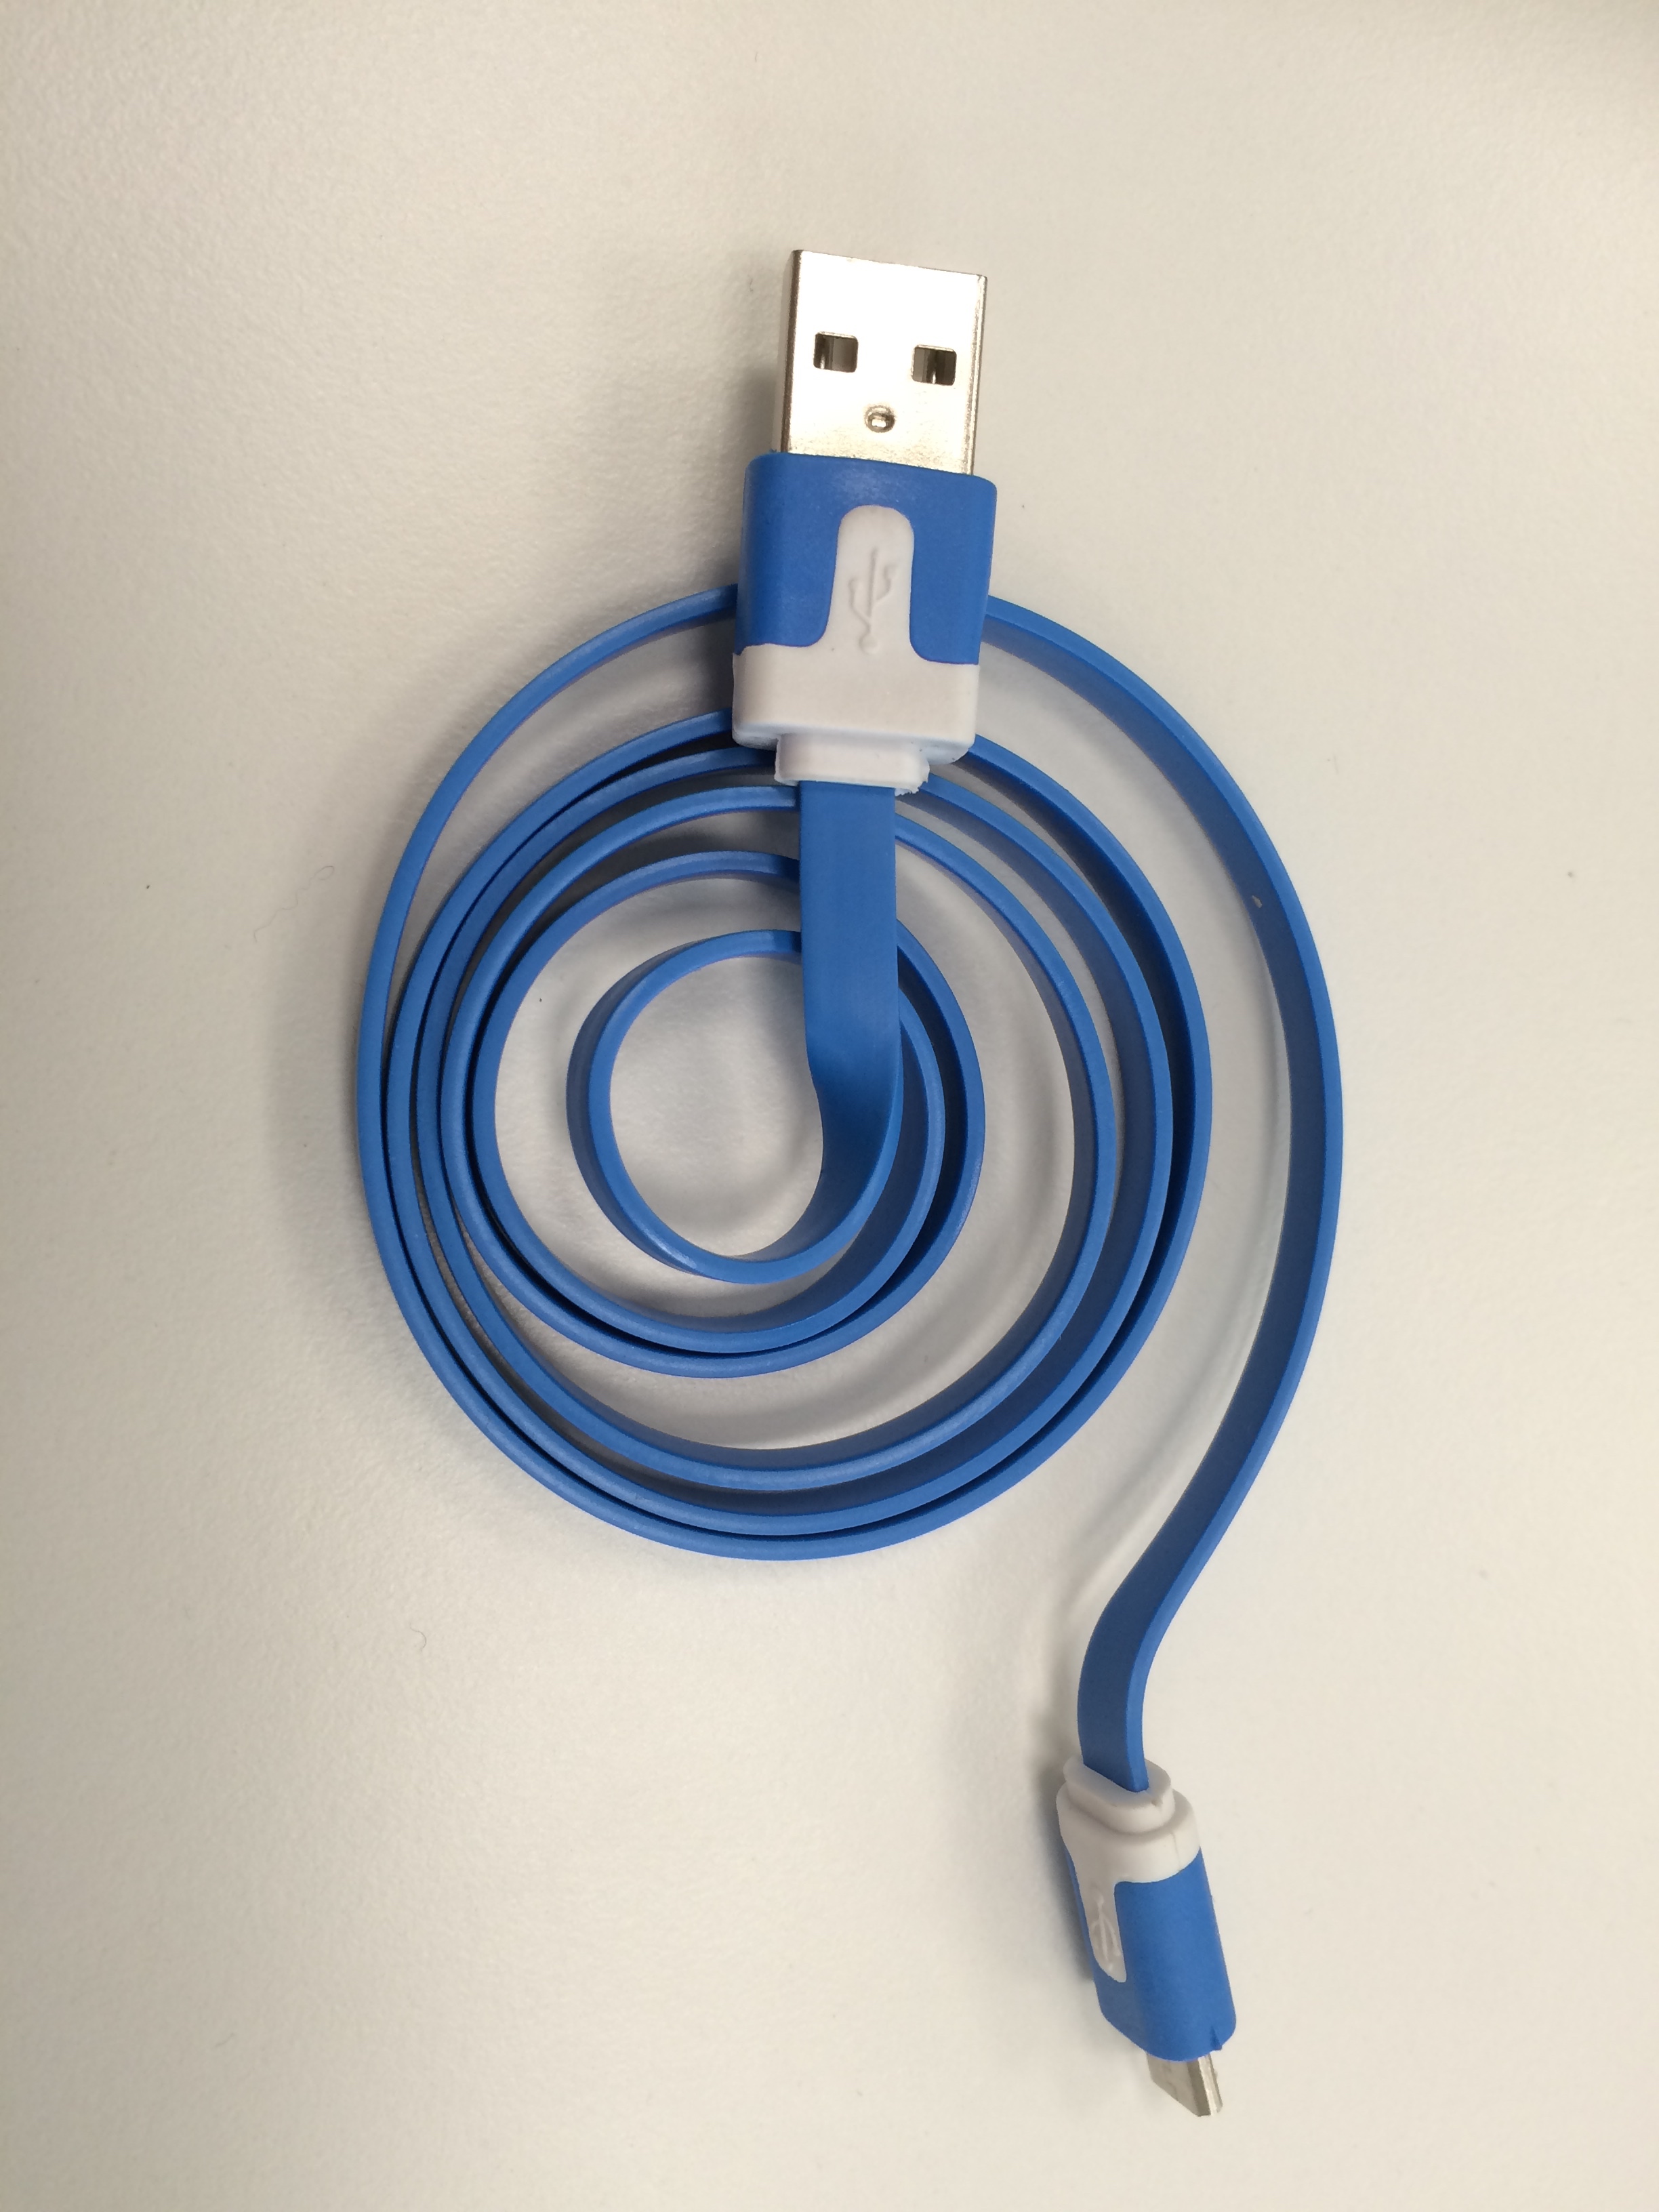 Grenouille Bleue 2 Cable USB.jpg